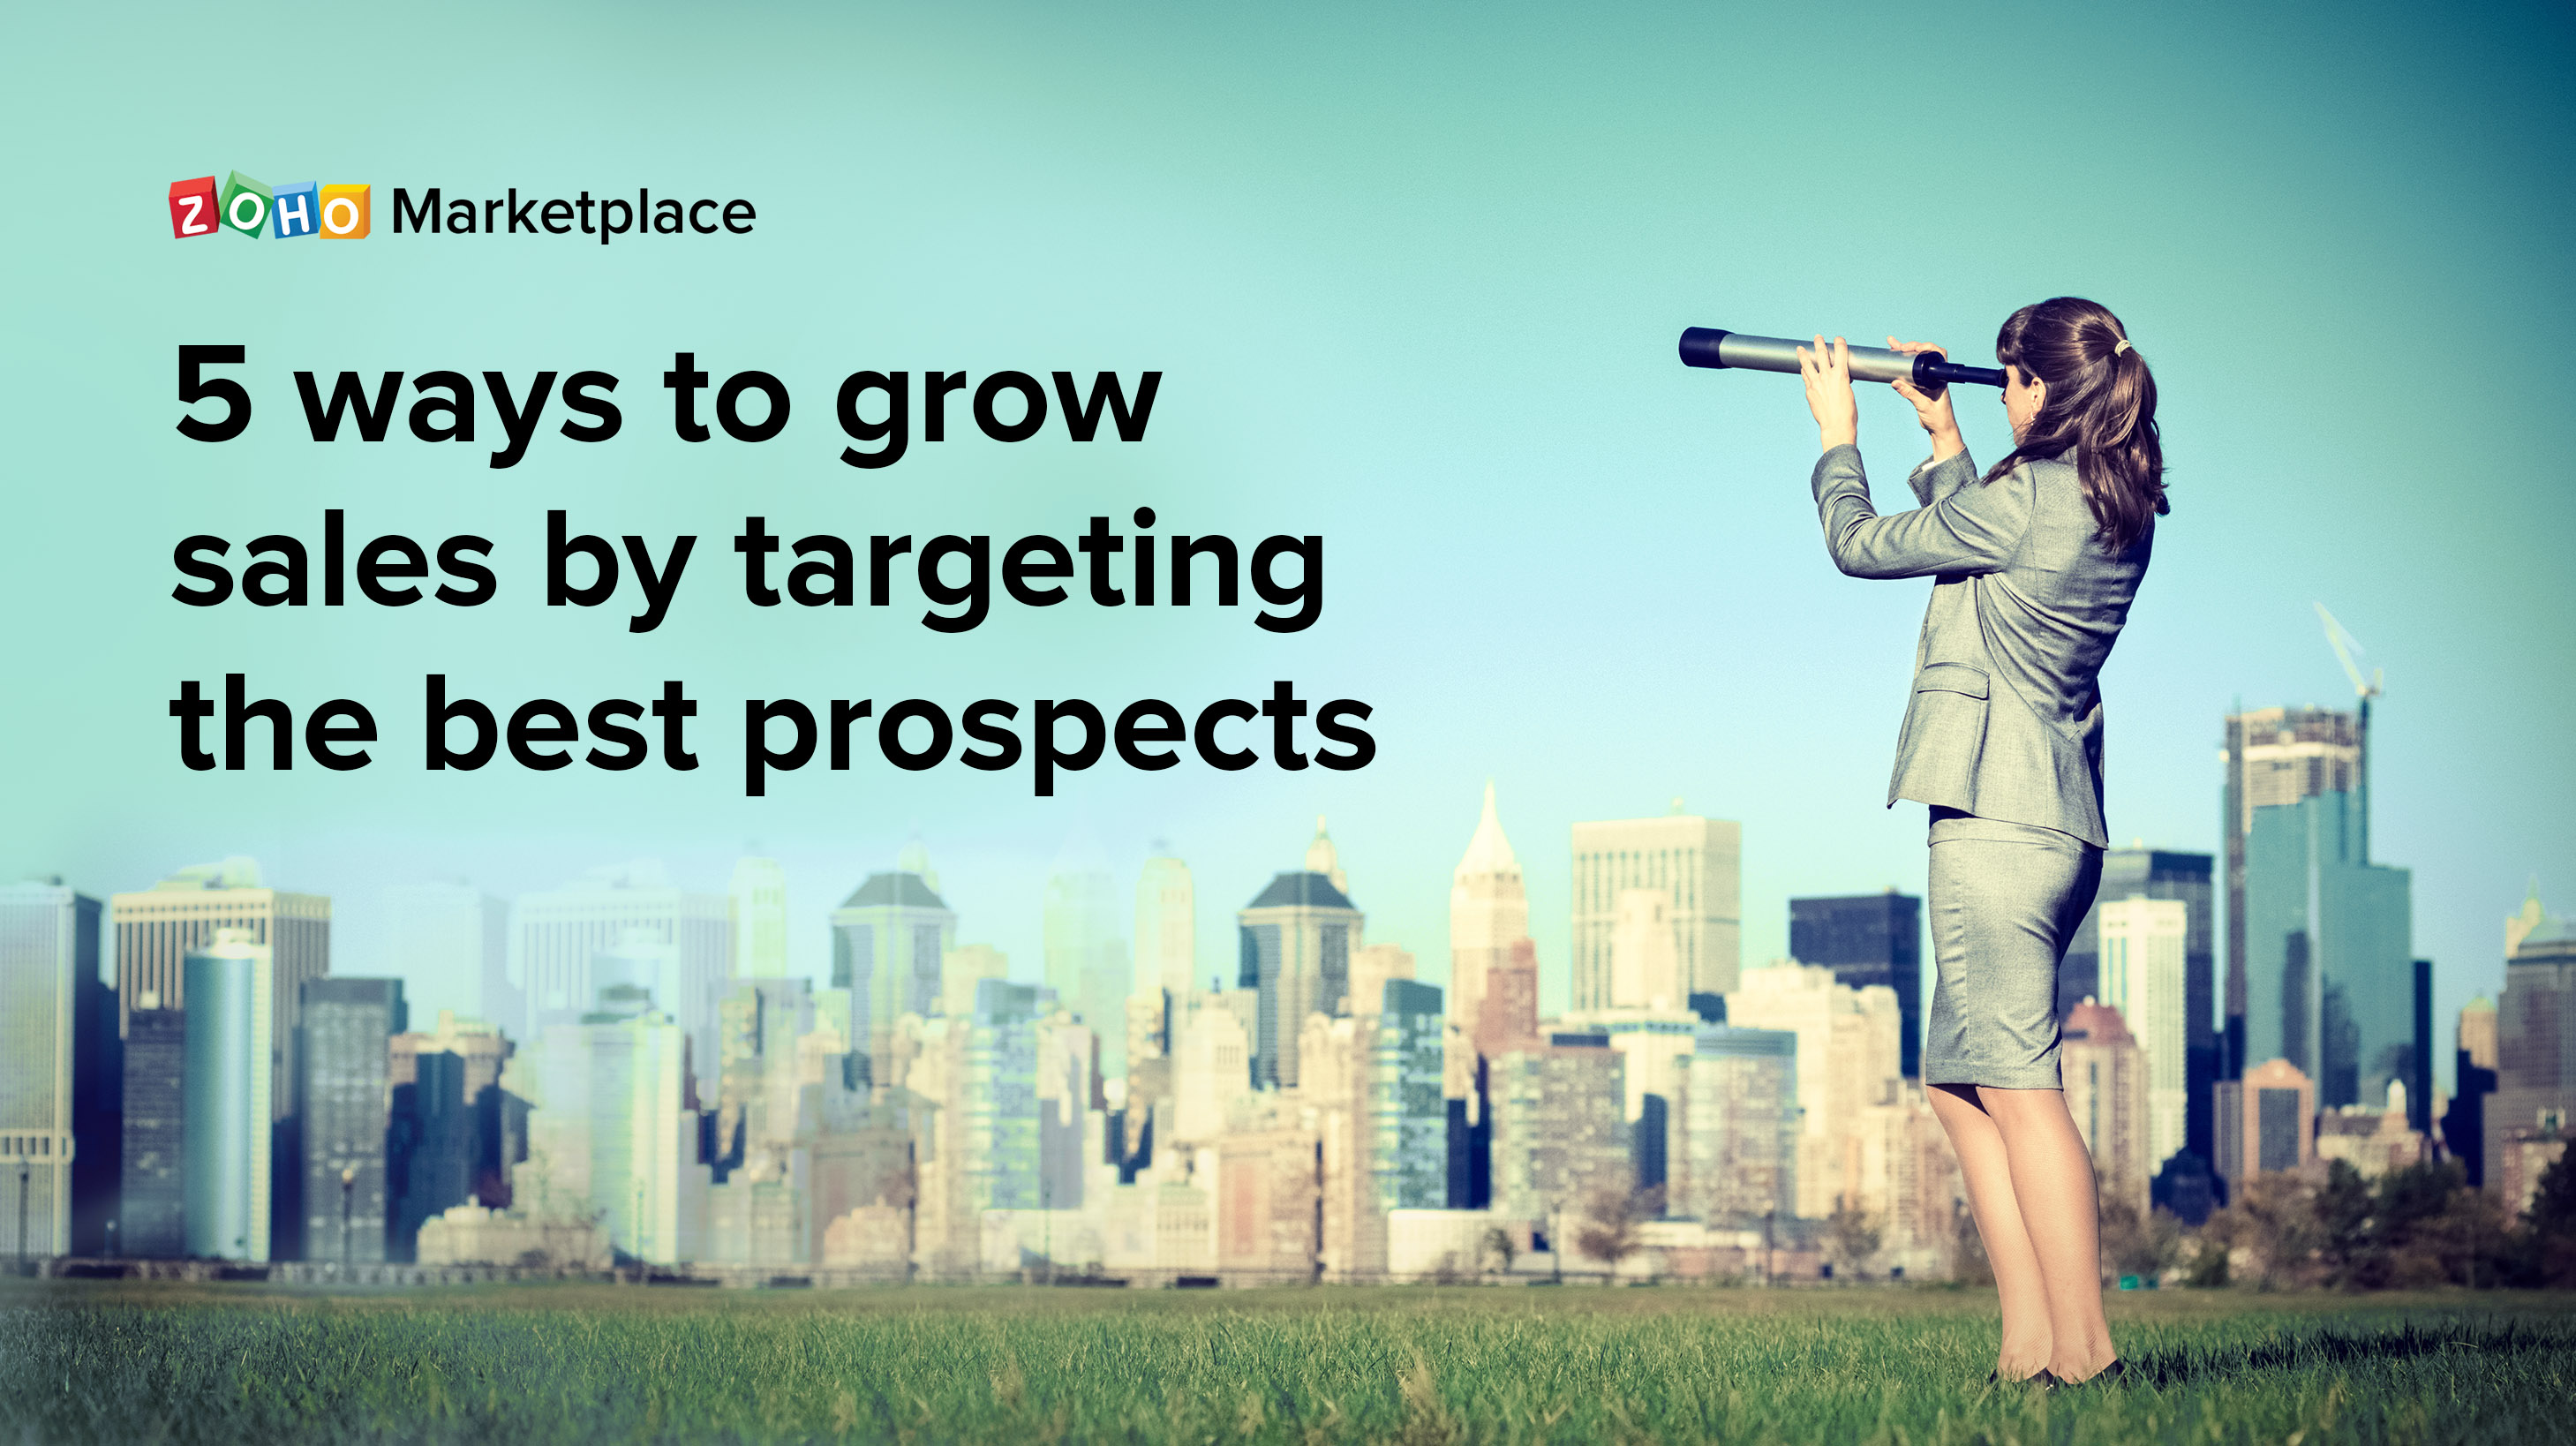 ProTips: 5 ways to grow sales by targeting the best prospects